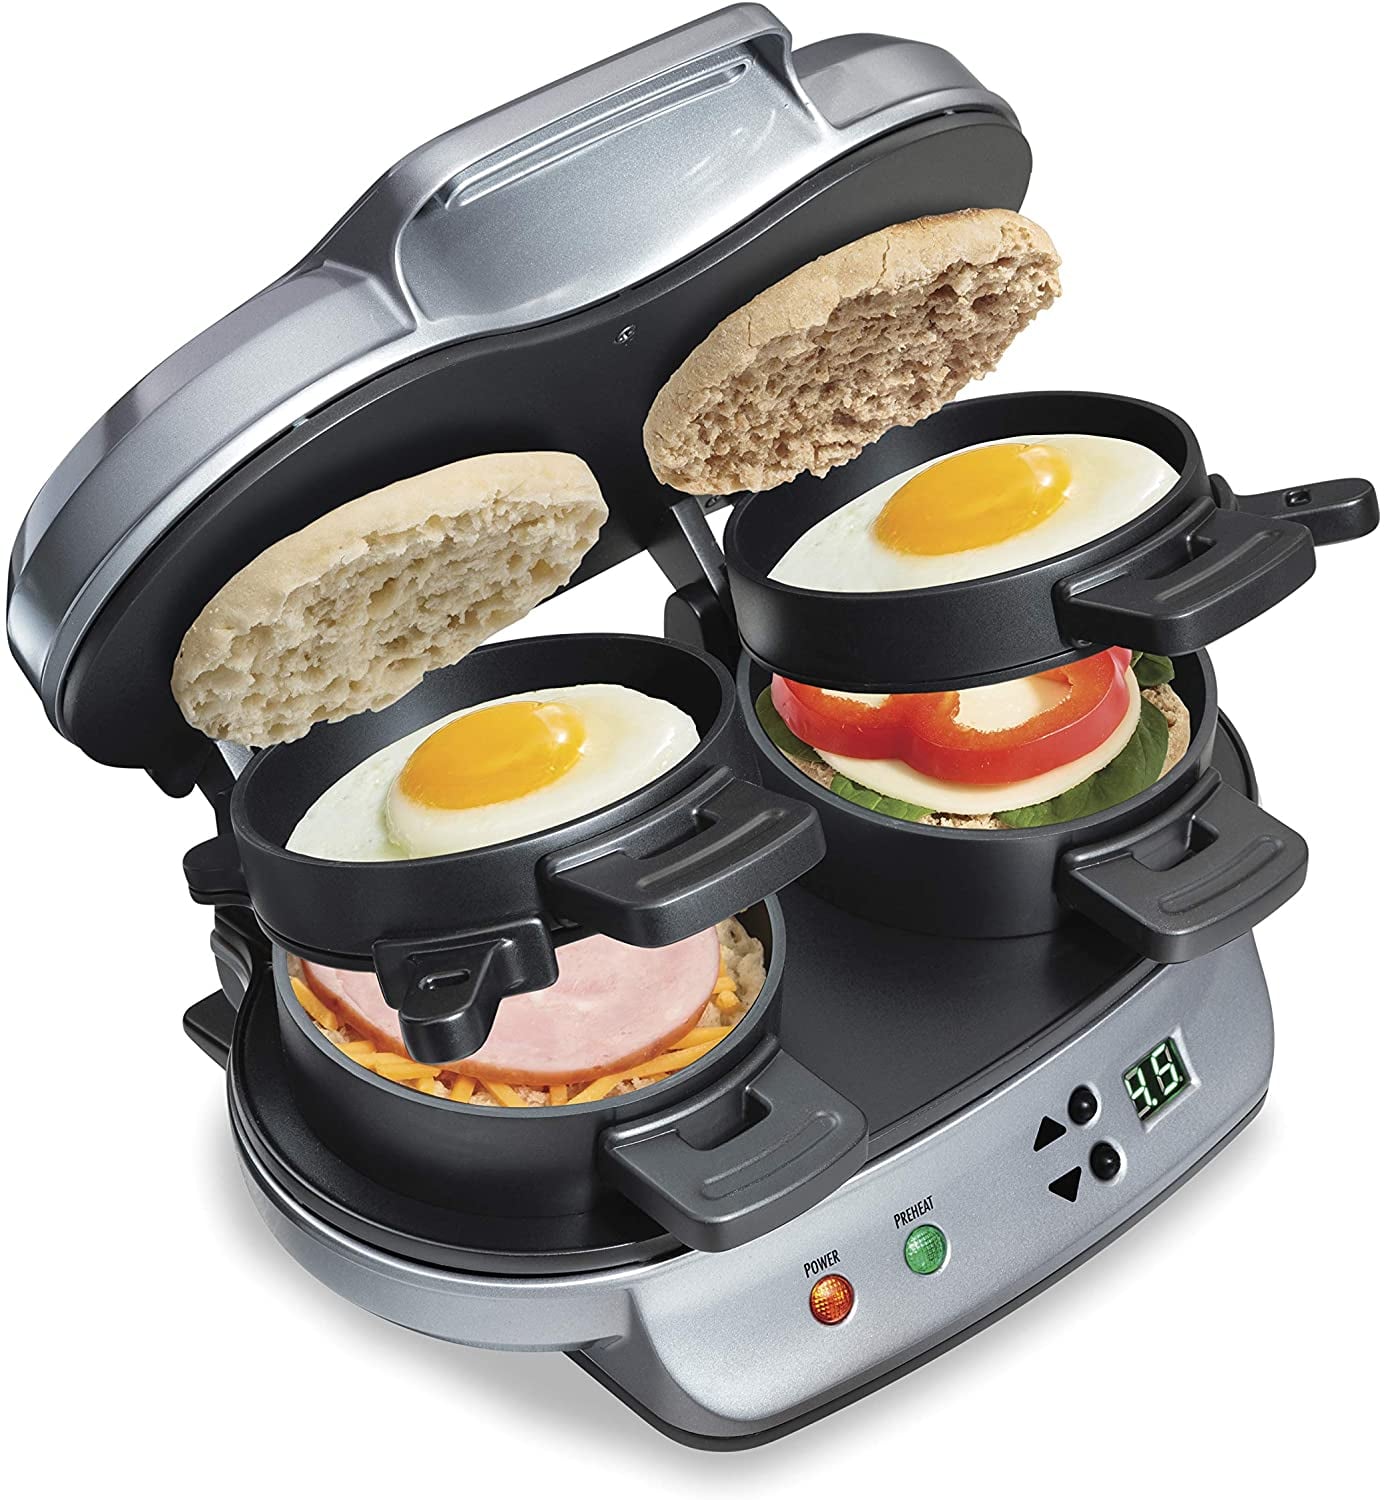 This 6-In-1 Kitchen Gadget Makes Quality Breakfast In A Snap